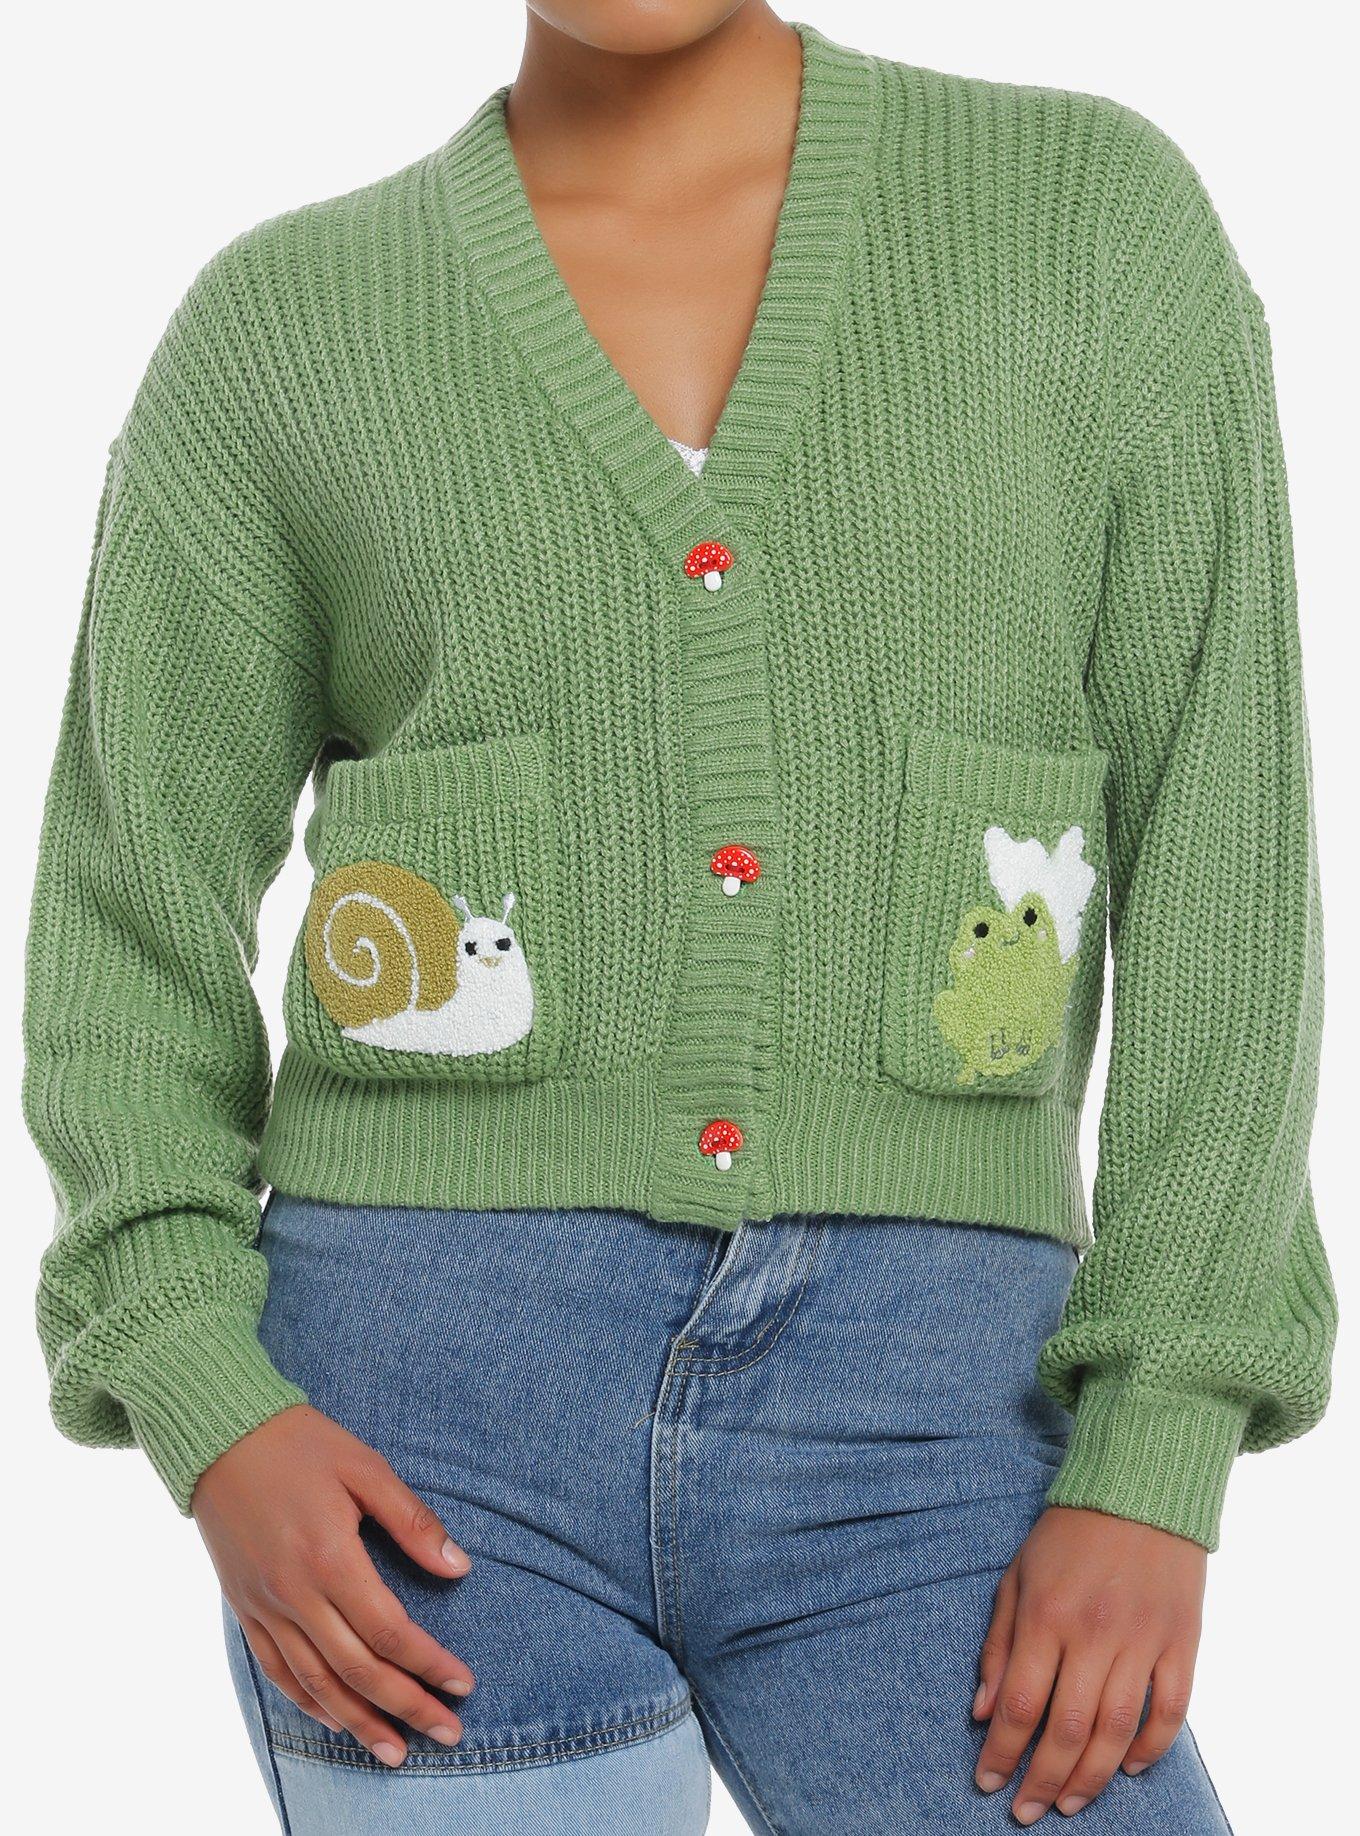 Snail Hot Crop Fable Topic & Cardigan Frog Girls Thorn & |